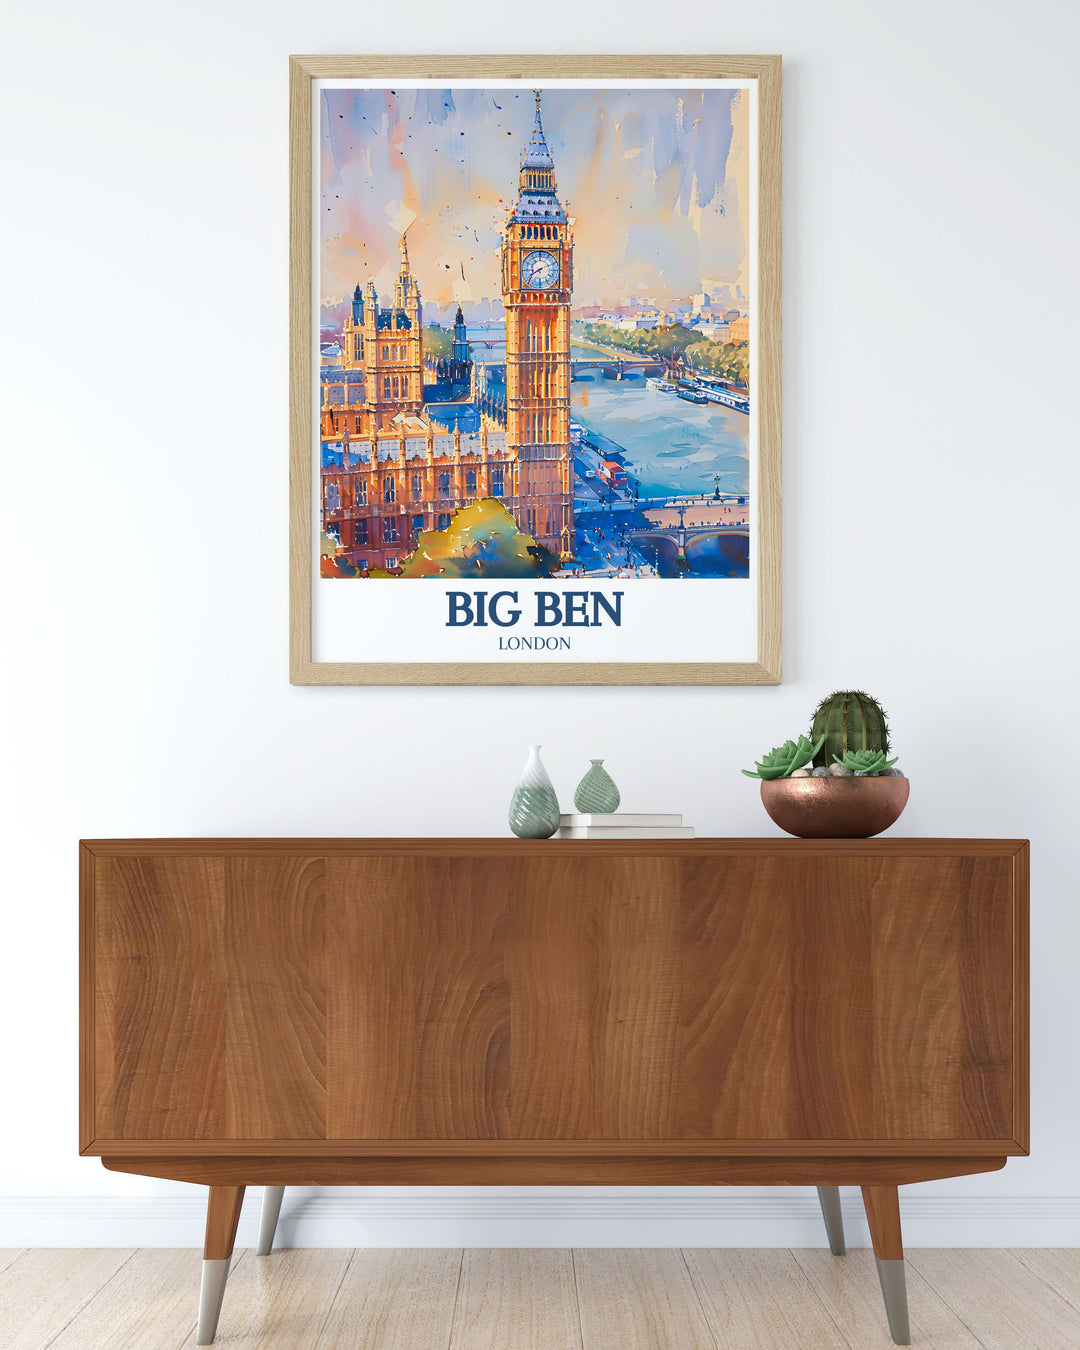 Stunning London print highlighting the intricate architecture of Big Ben and the Houses of Parliament alongside the tranquil River Thames, ideal for history enthusiasts and travel art lovers.